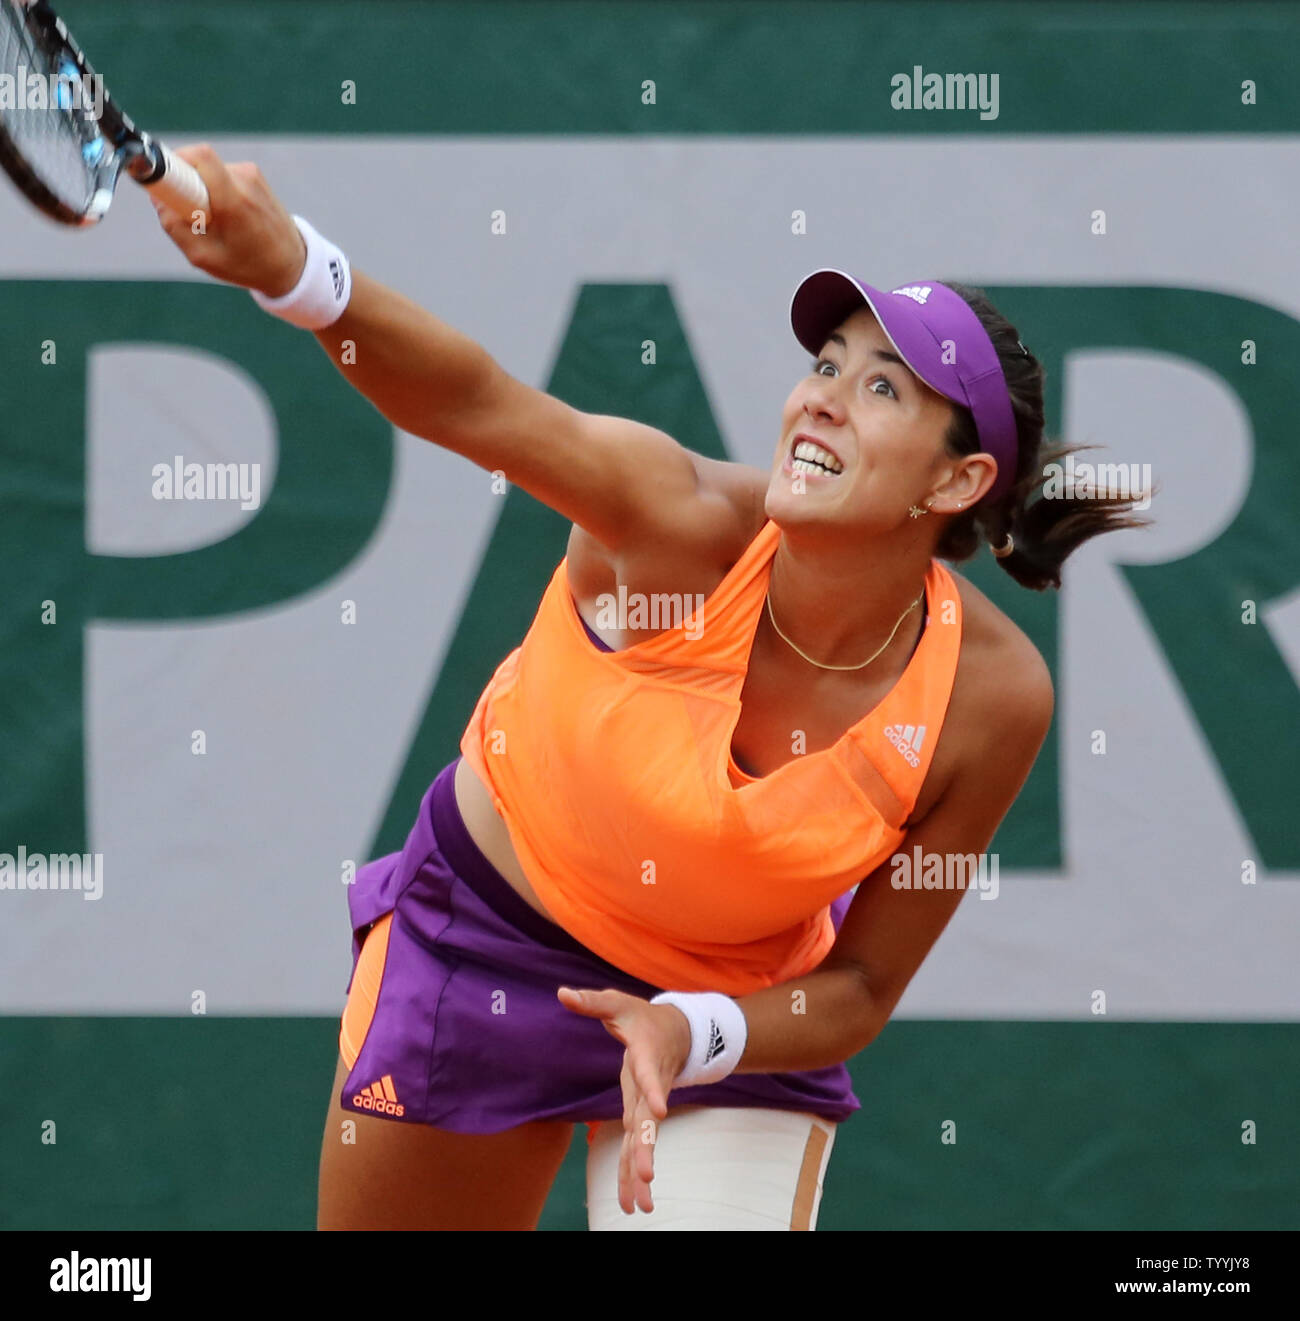 Maria sharapova french open 2014 hi-res photography and images - Page 2 - Alamy